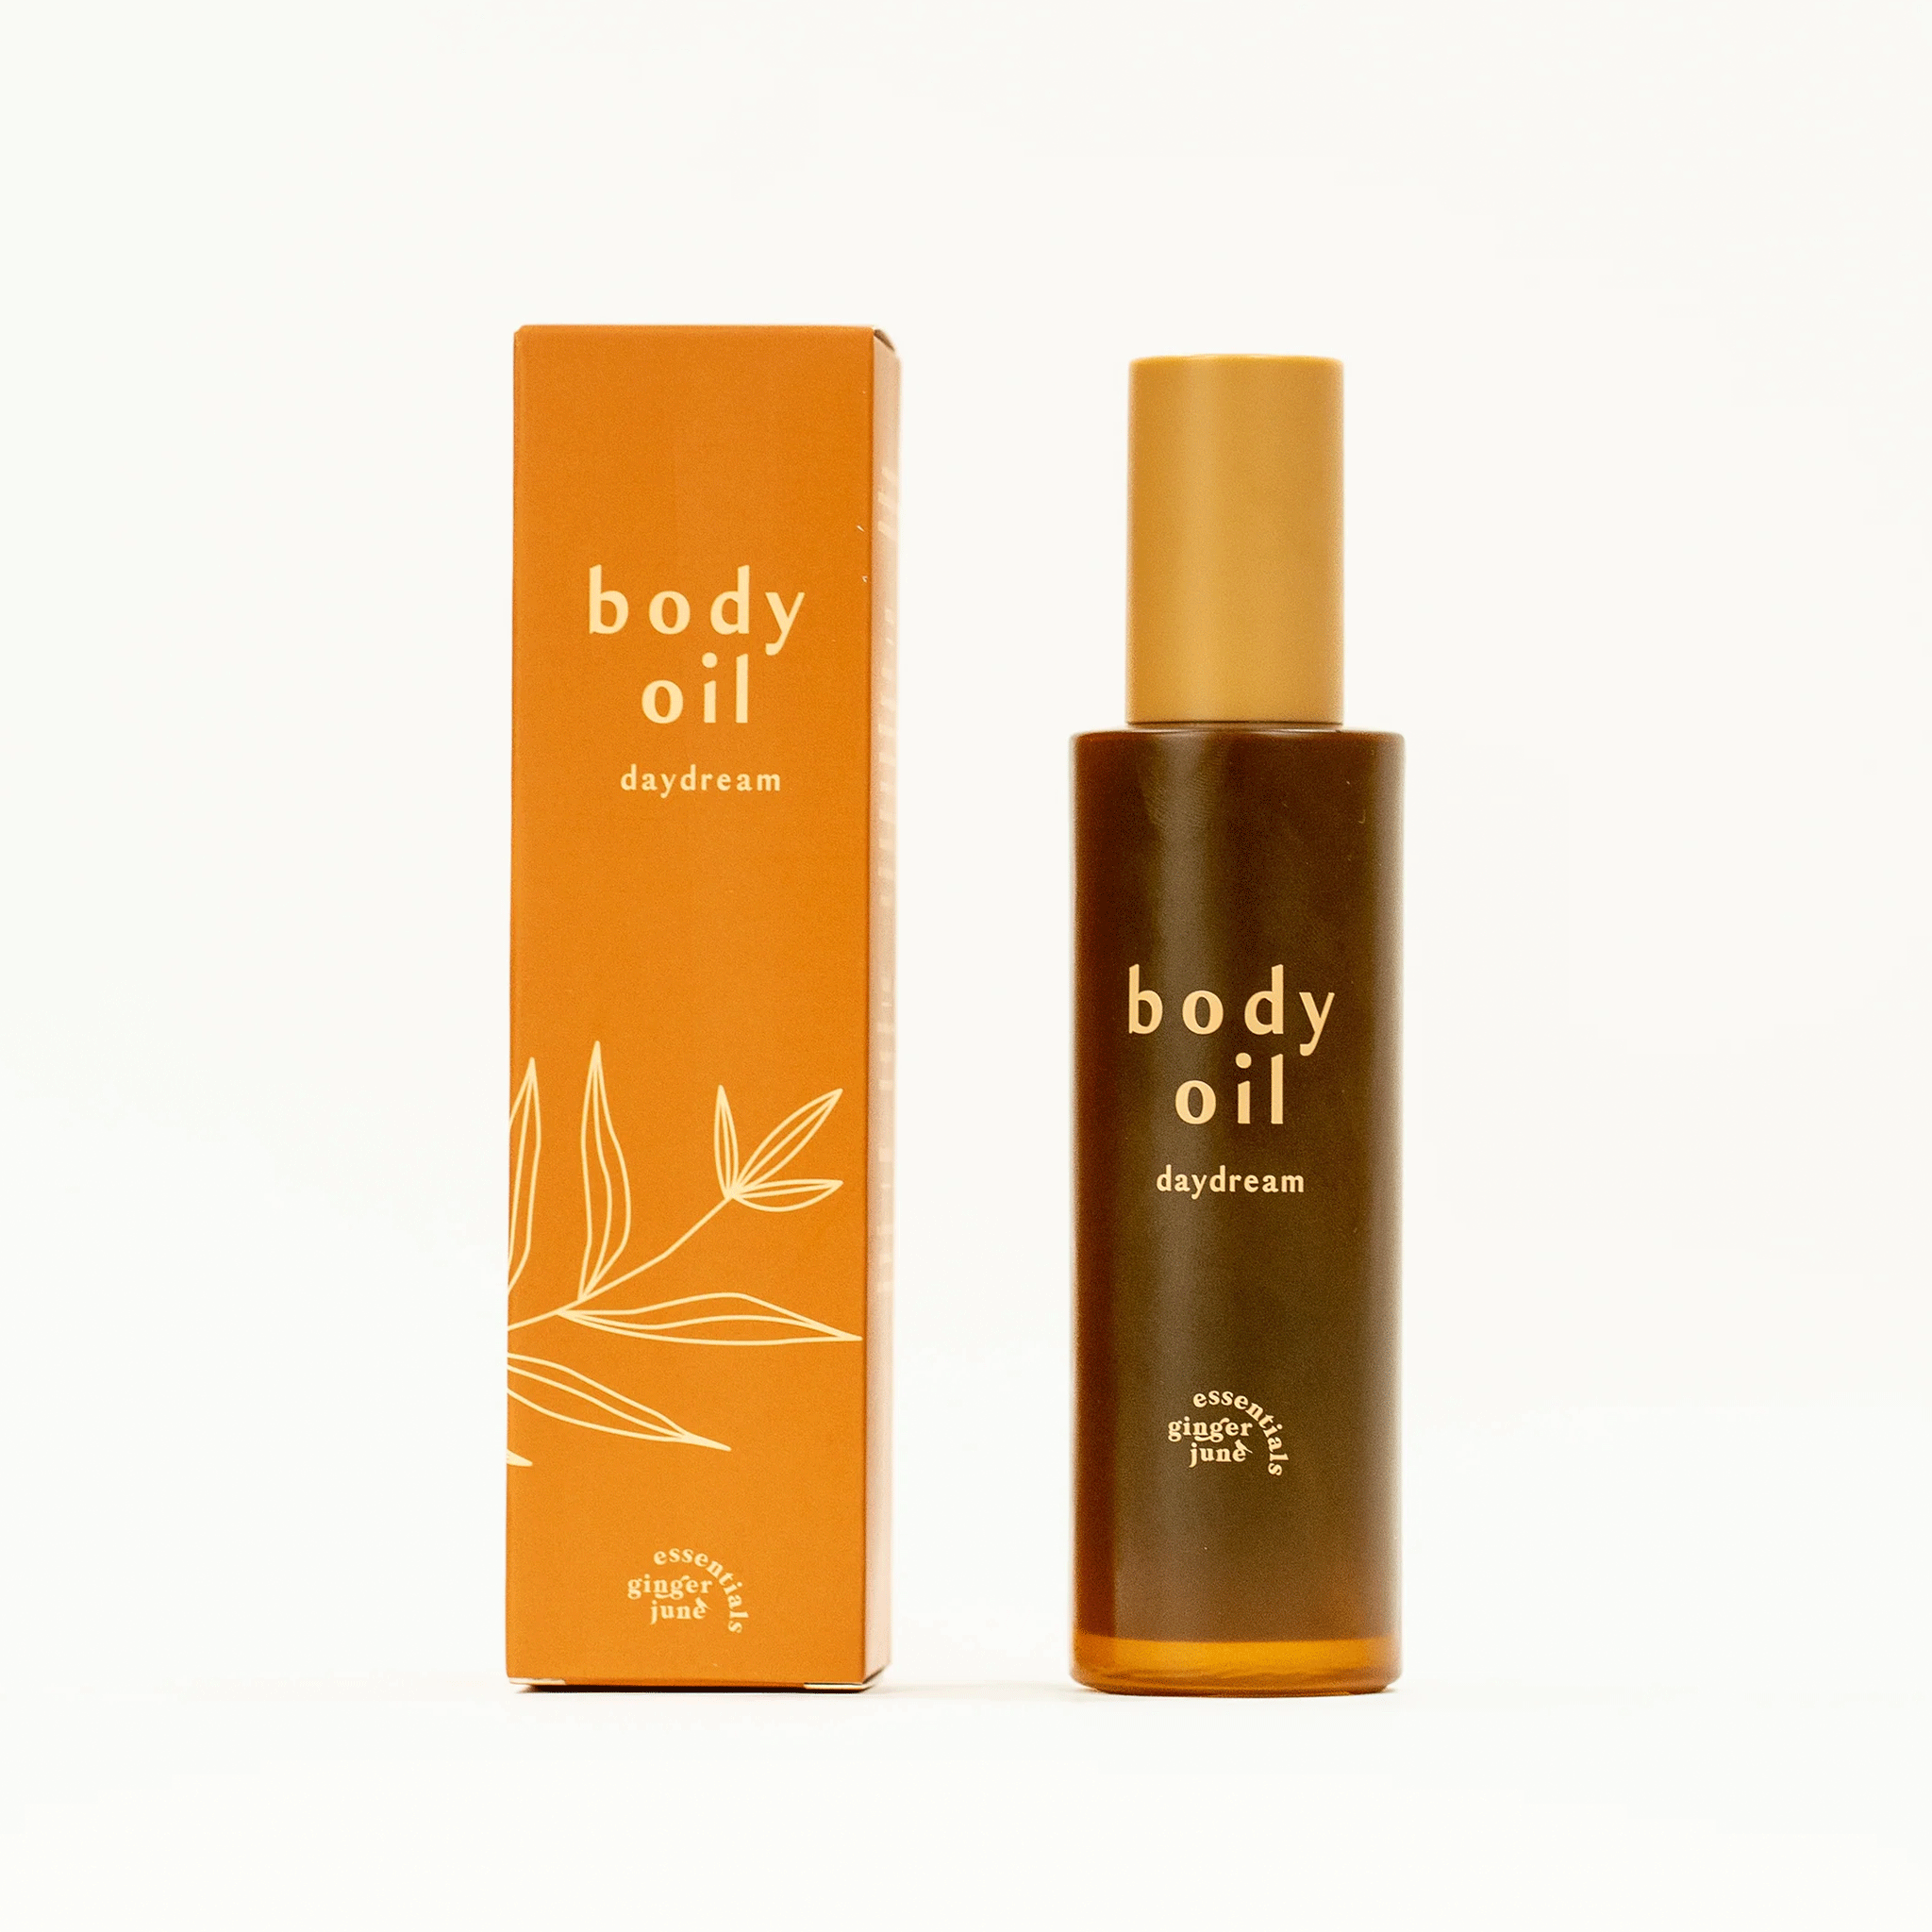 On a white background is a bottle of body oil with a tan cap and an orange box packaging along with text on the front that reads, "body oil daydream". 